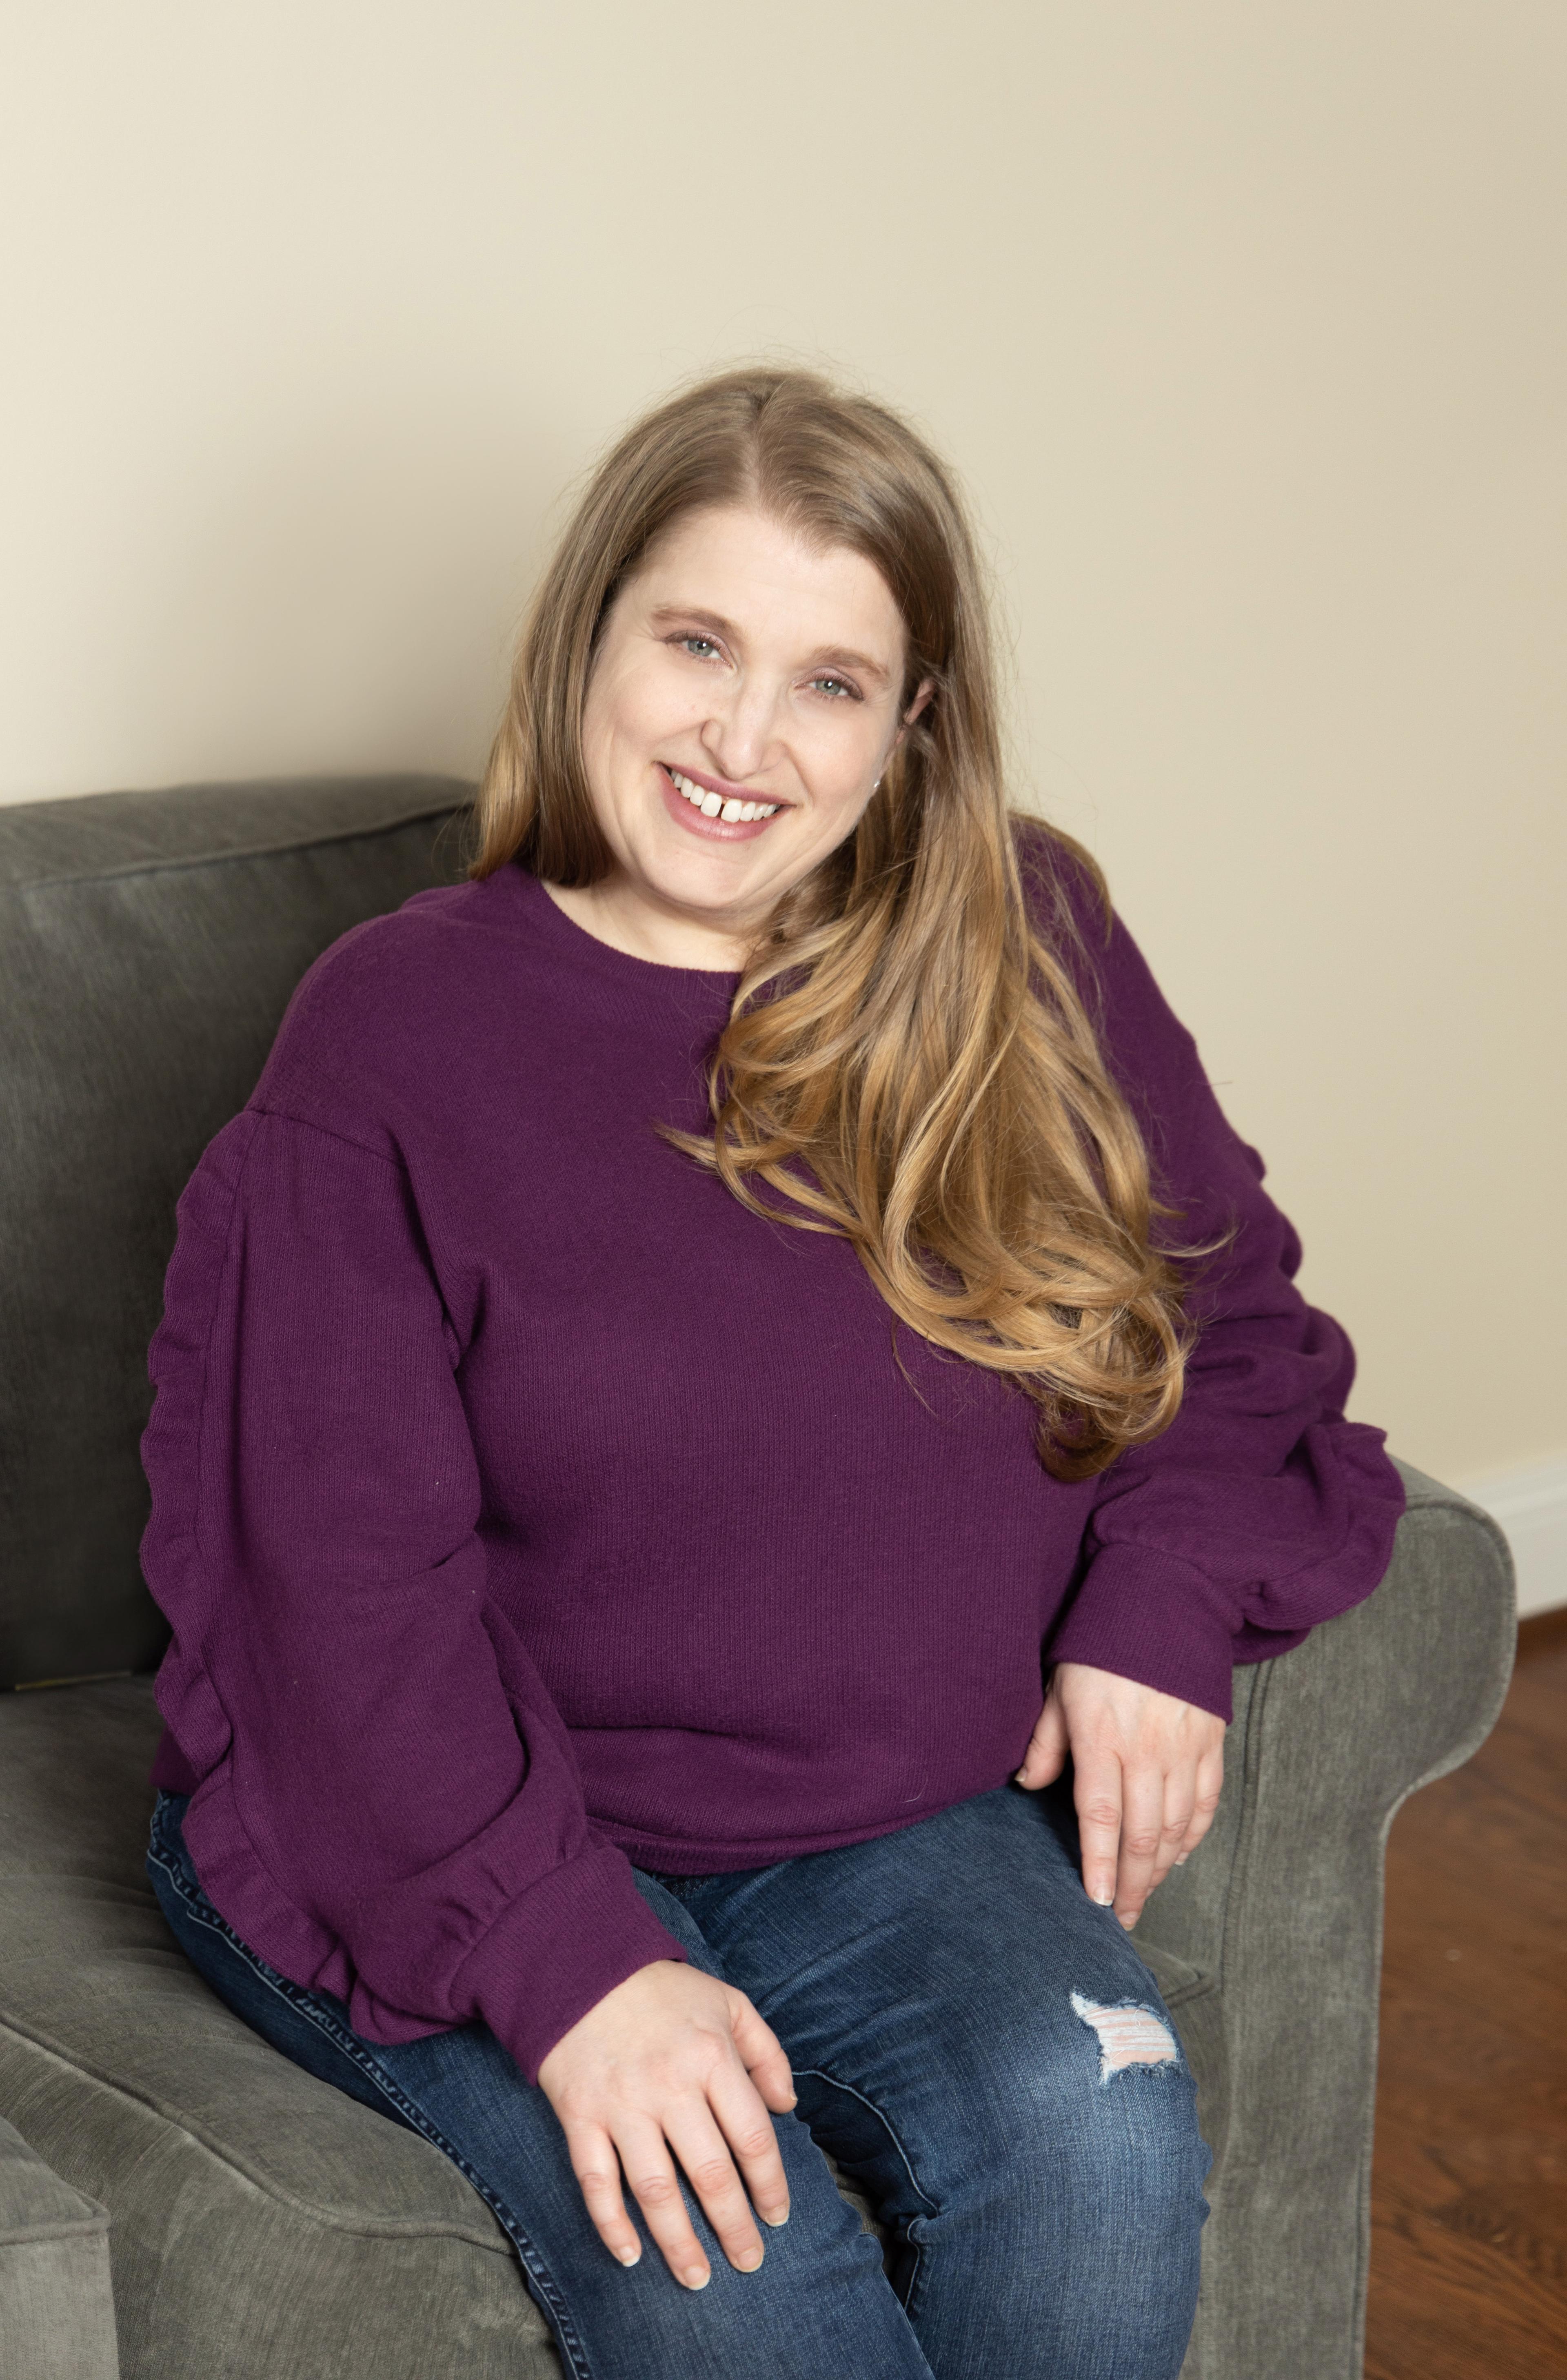 Franki in purple seated on couch branding pic.jpg